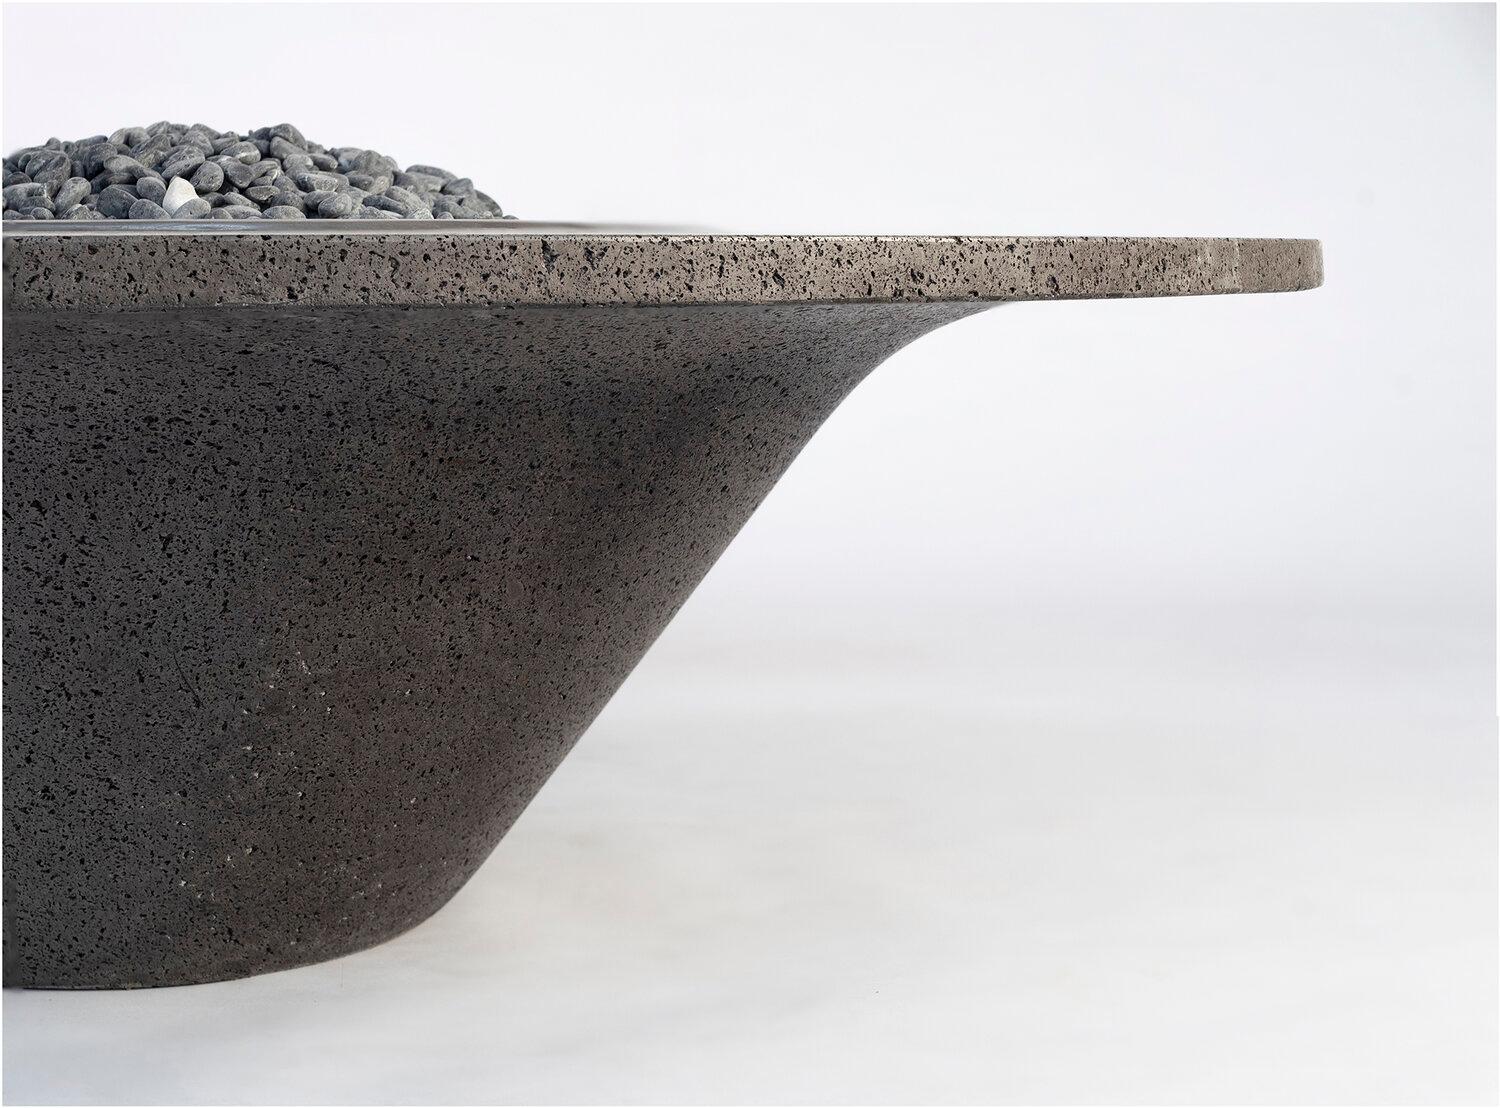 UMO Roca, a volcanic stone fire pit/sculpture created by expert craftspeople, armed by chisel and hammer, chipping away to create symmetry, balance, function and form. Within this formidable monolithic simplicity and polished border highlight, UMO